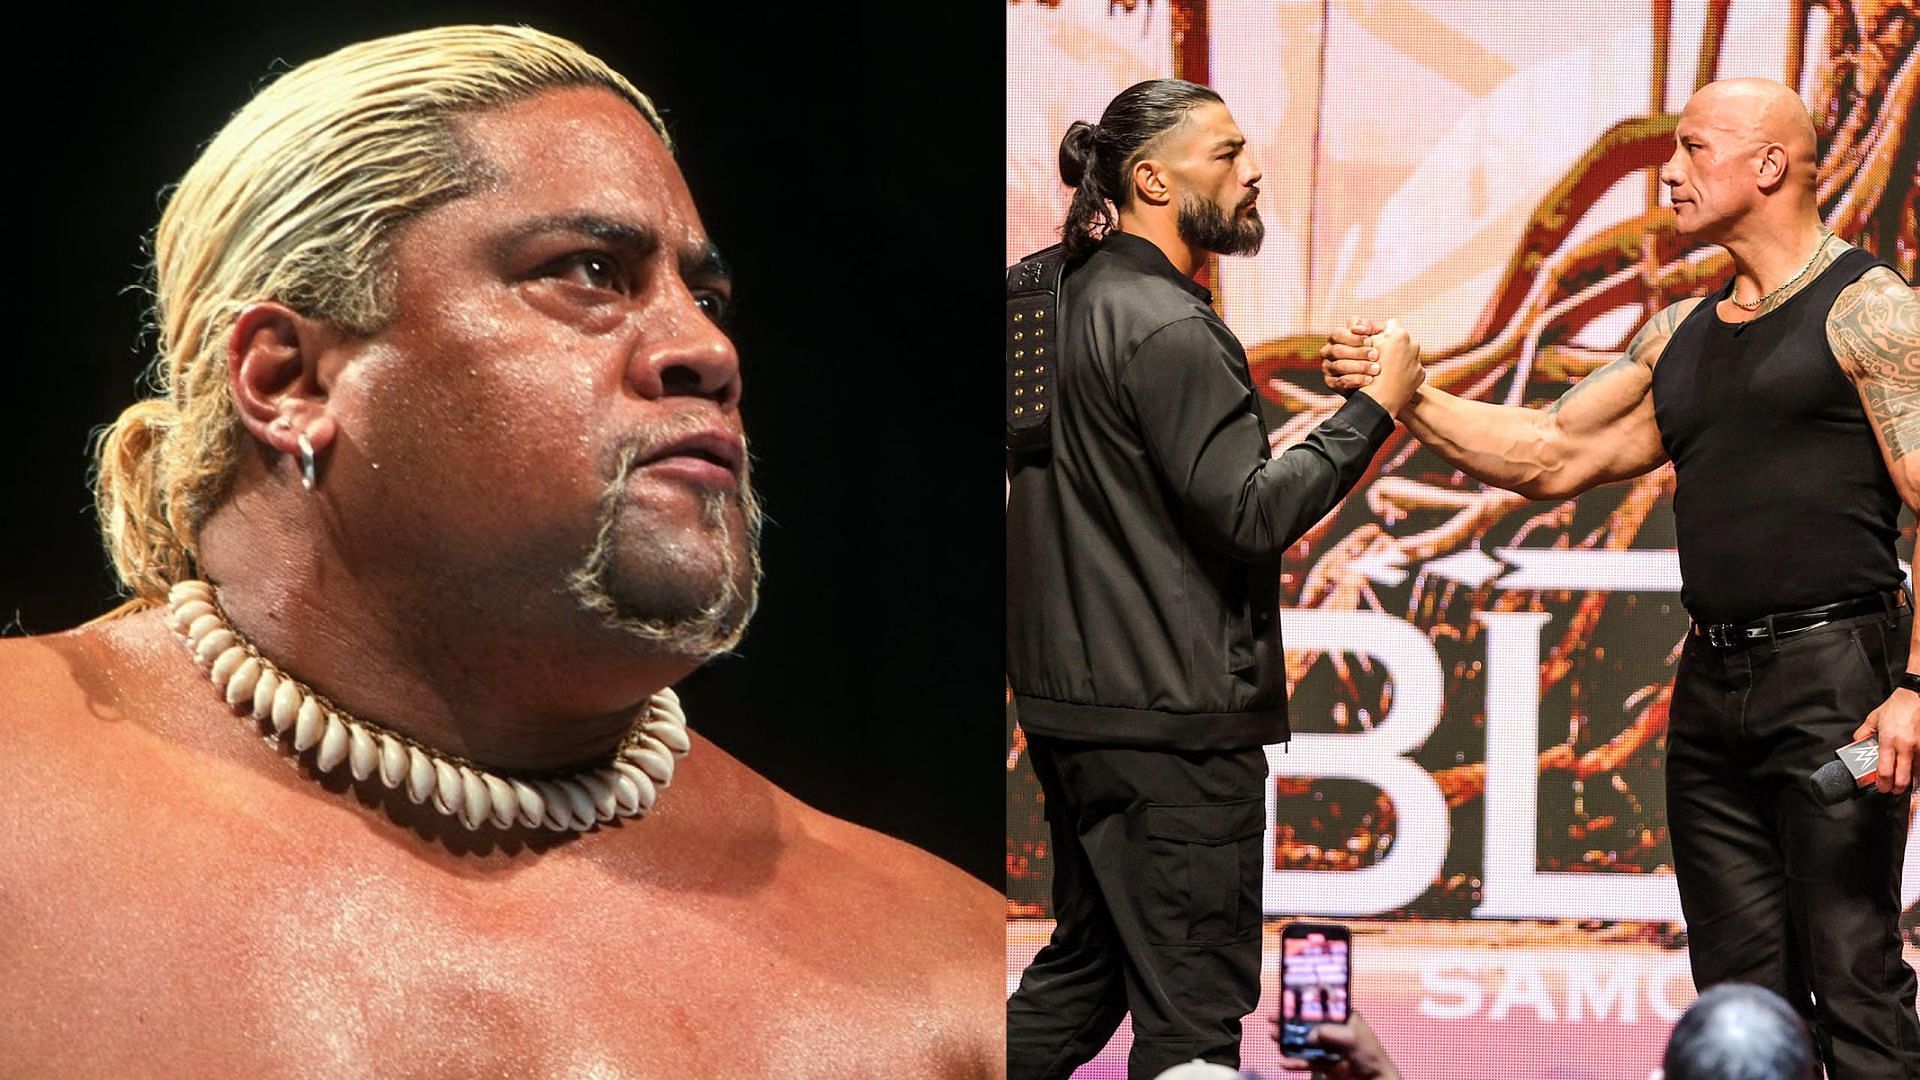 Rikishi sent a message after Roman Reigns and The Rock